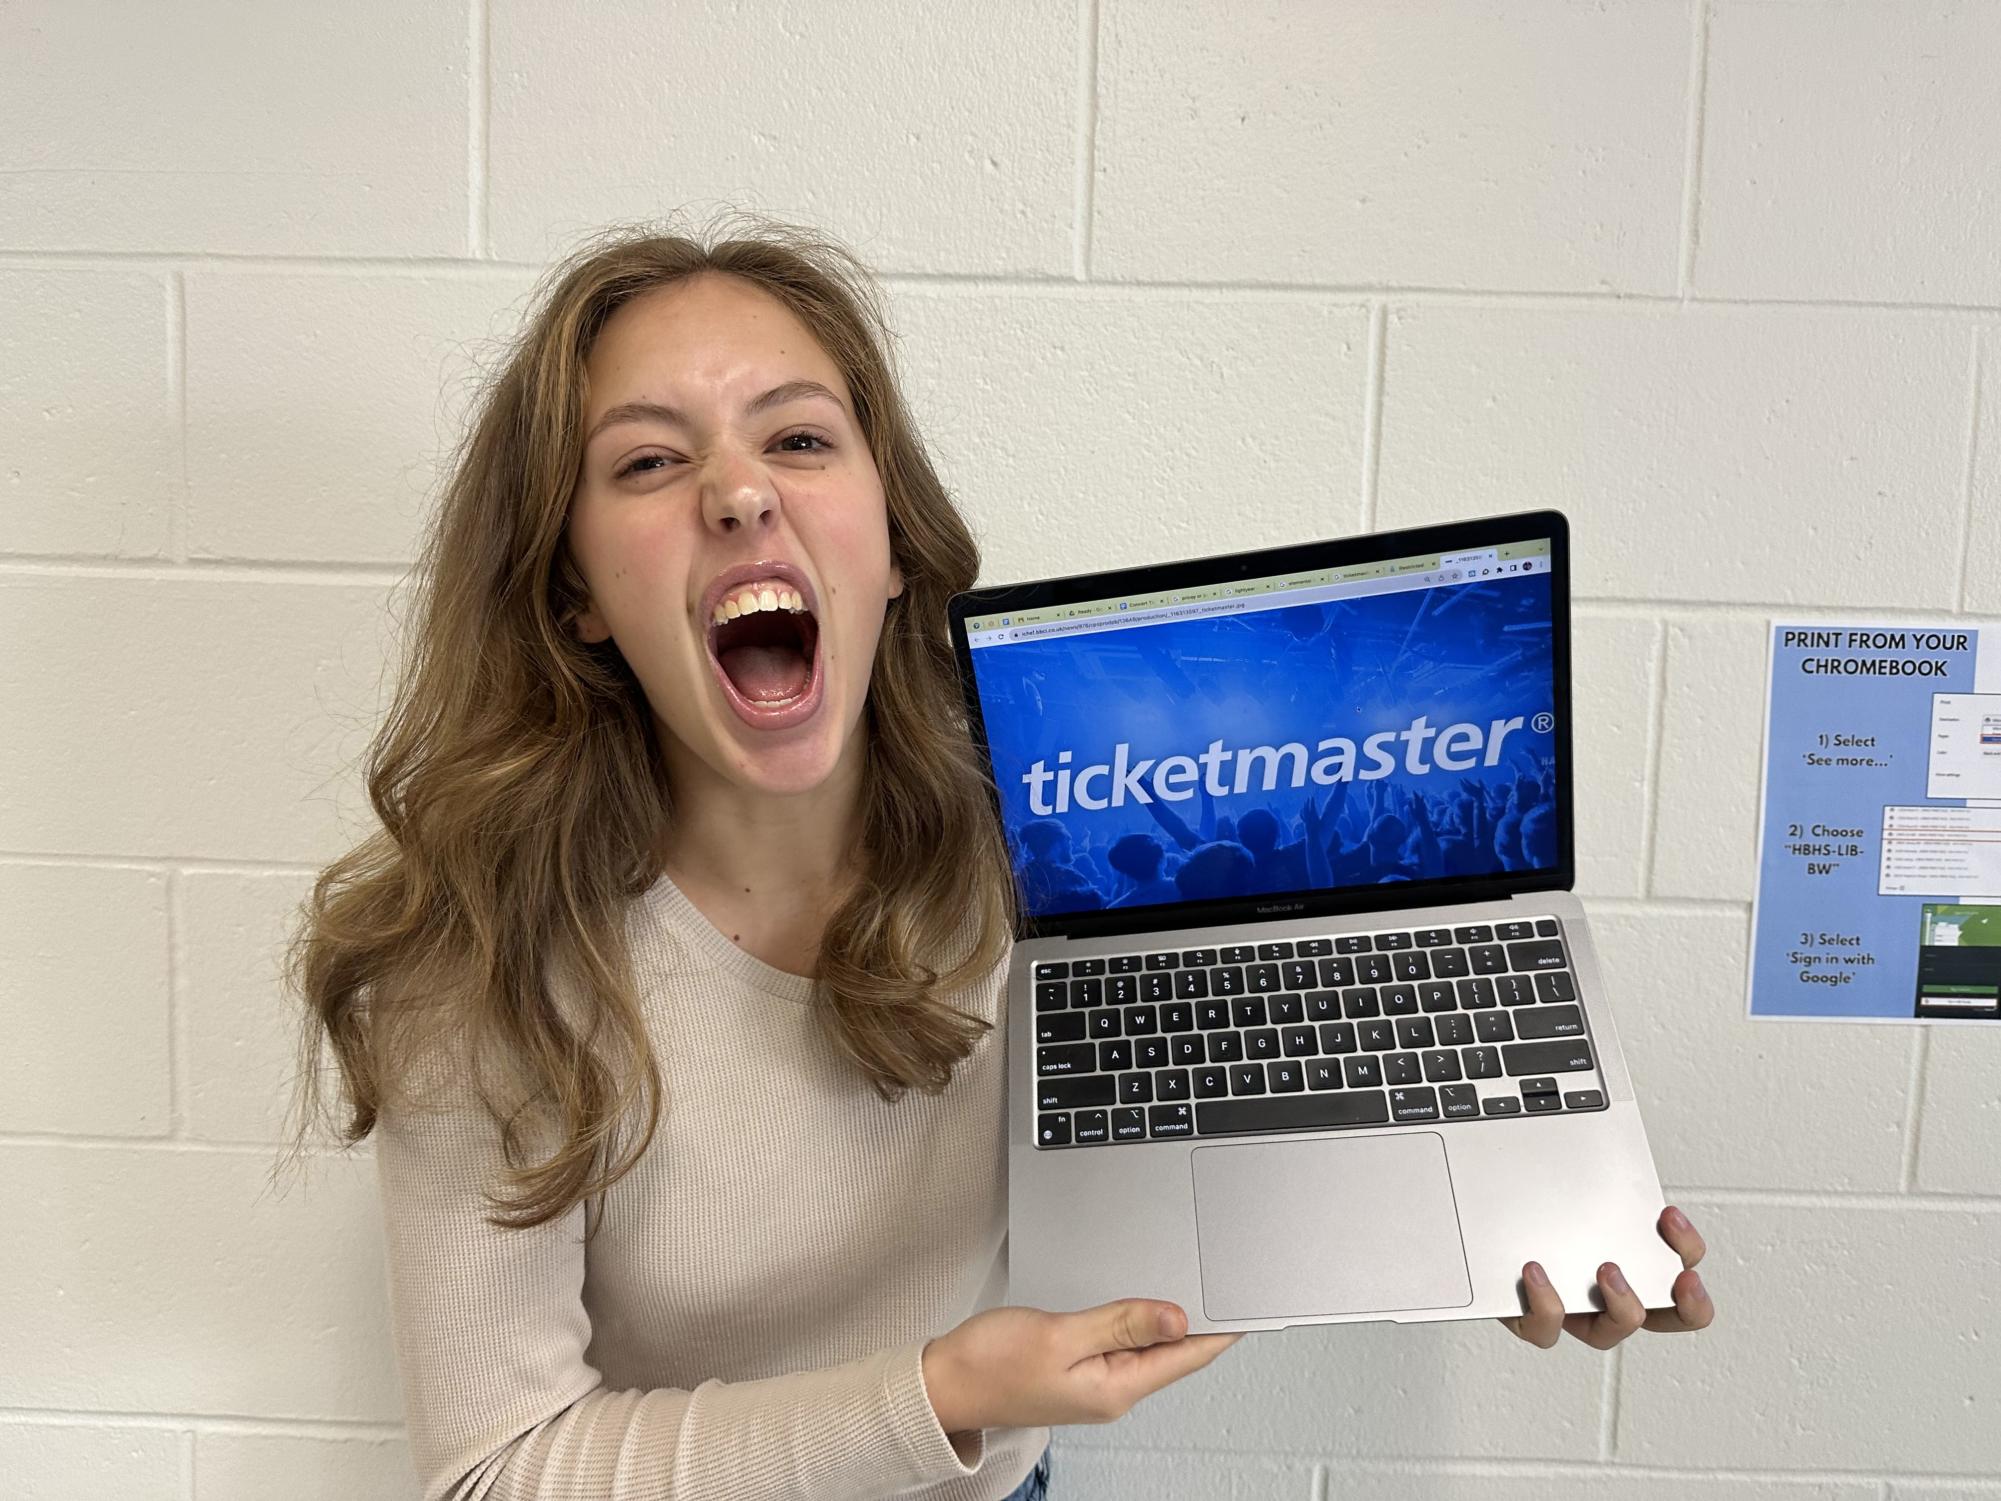 Lolly Adair ‘25 expresses her anger towards Ticketmaster. Adair has struggled in the past to secure tickets on the website, including Taylor Swift’s “The Eras Tour.” “No one should have to go through this hard, long process just to get an hour or two of joy,” said Adair.